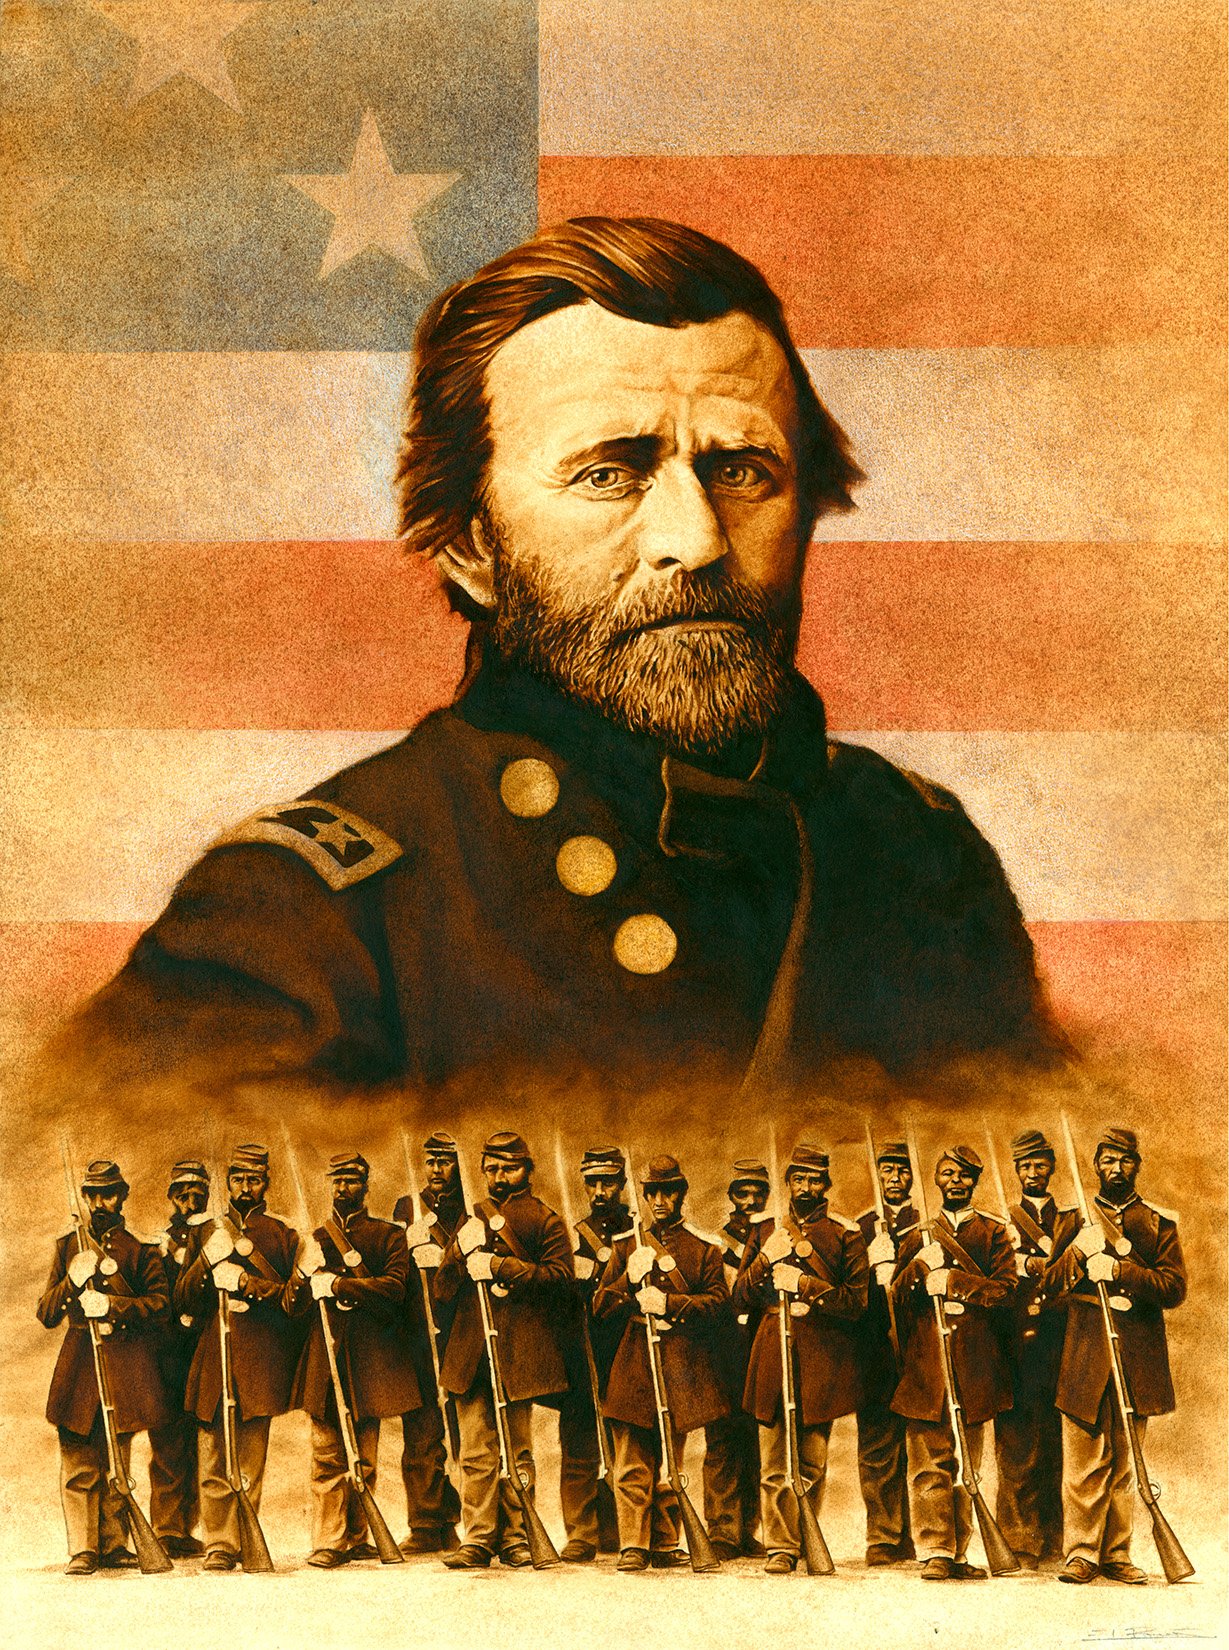 General Grant and the 54th Massachusetts